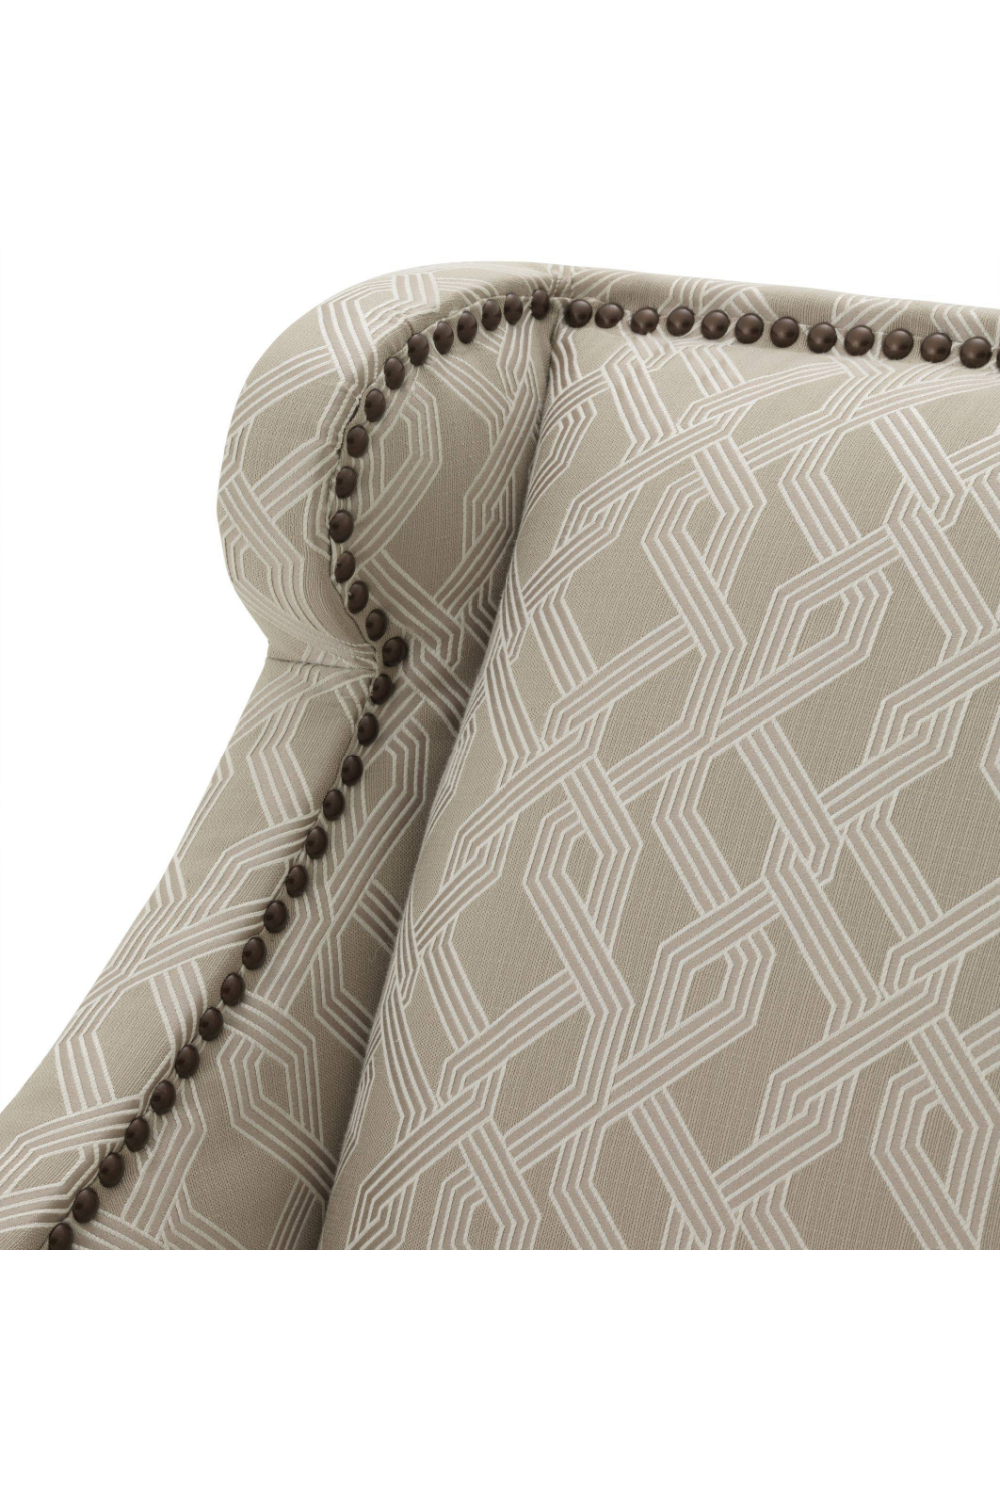 Wingback Accent Chair | Eichholtz Jenner | Oroa.com